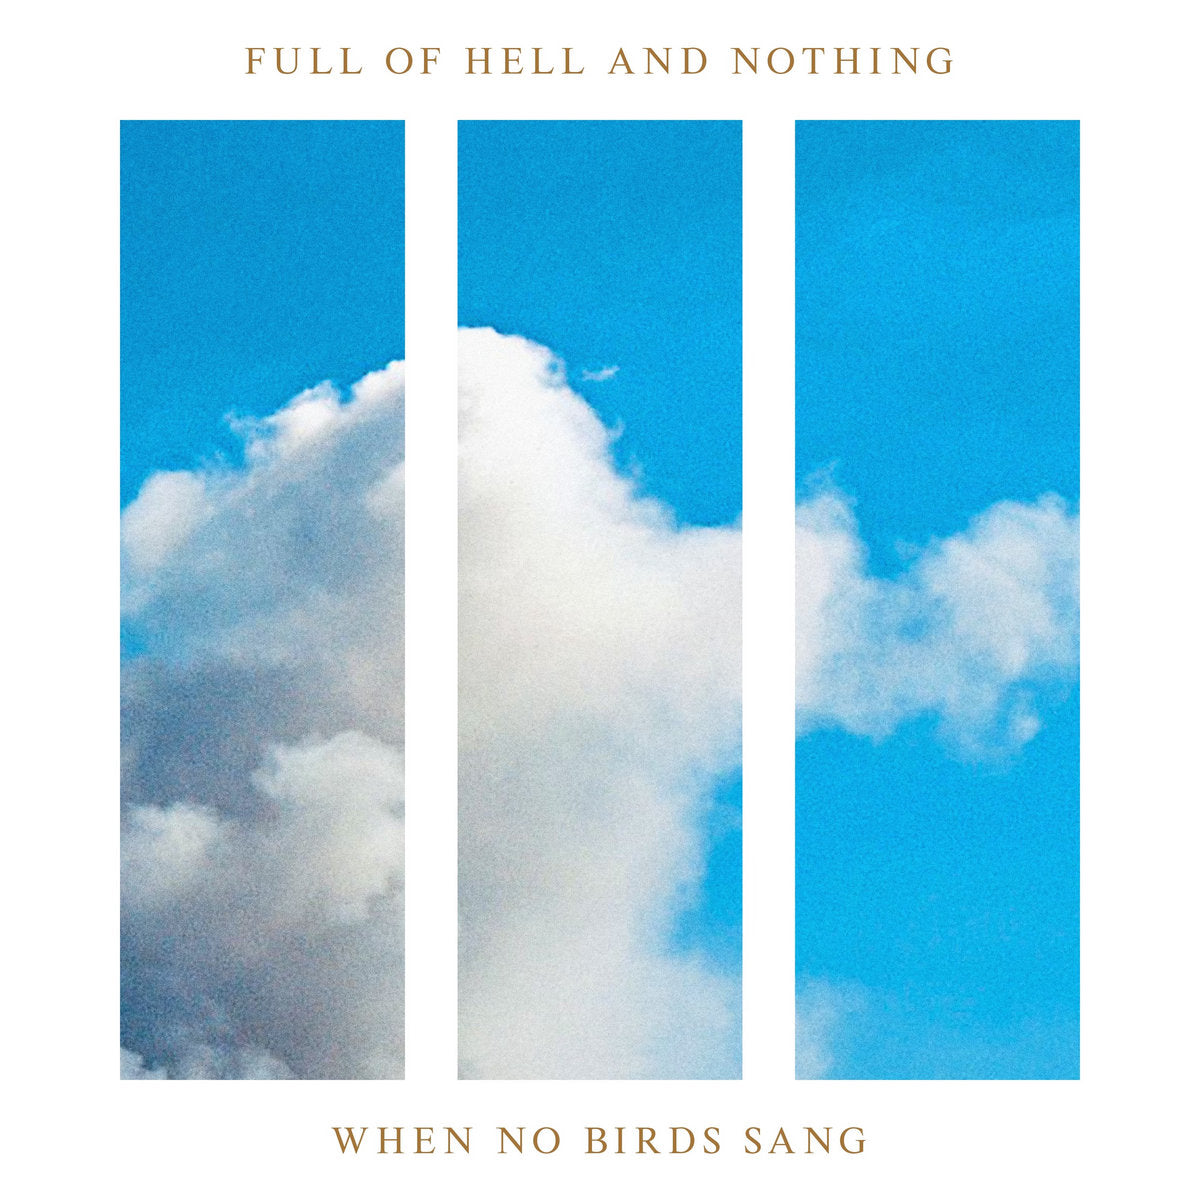 Full of Hell & Nothing  "When No Birds Sang" LP